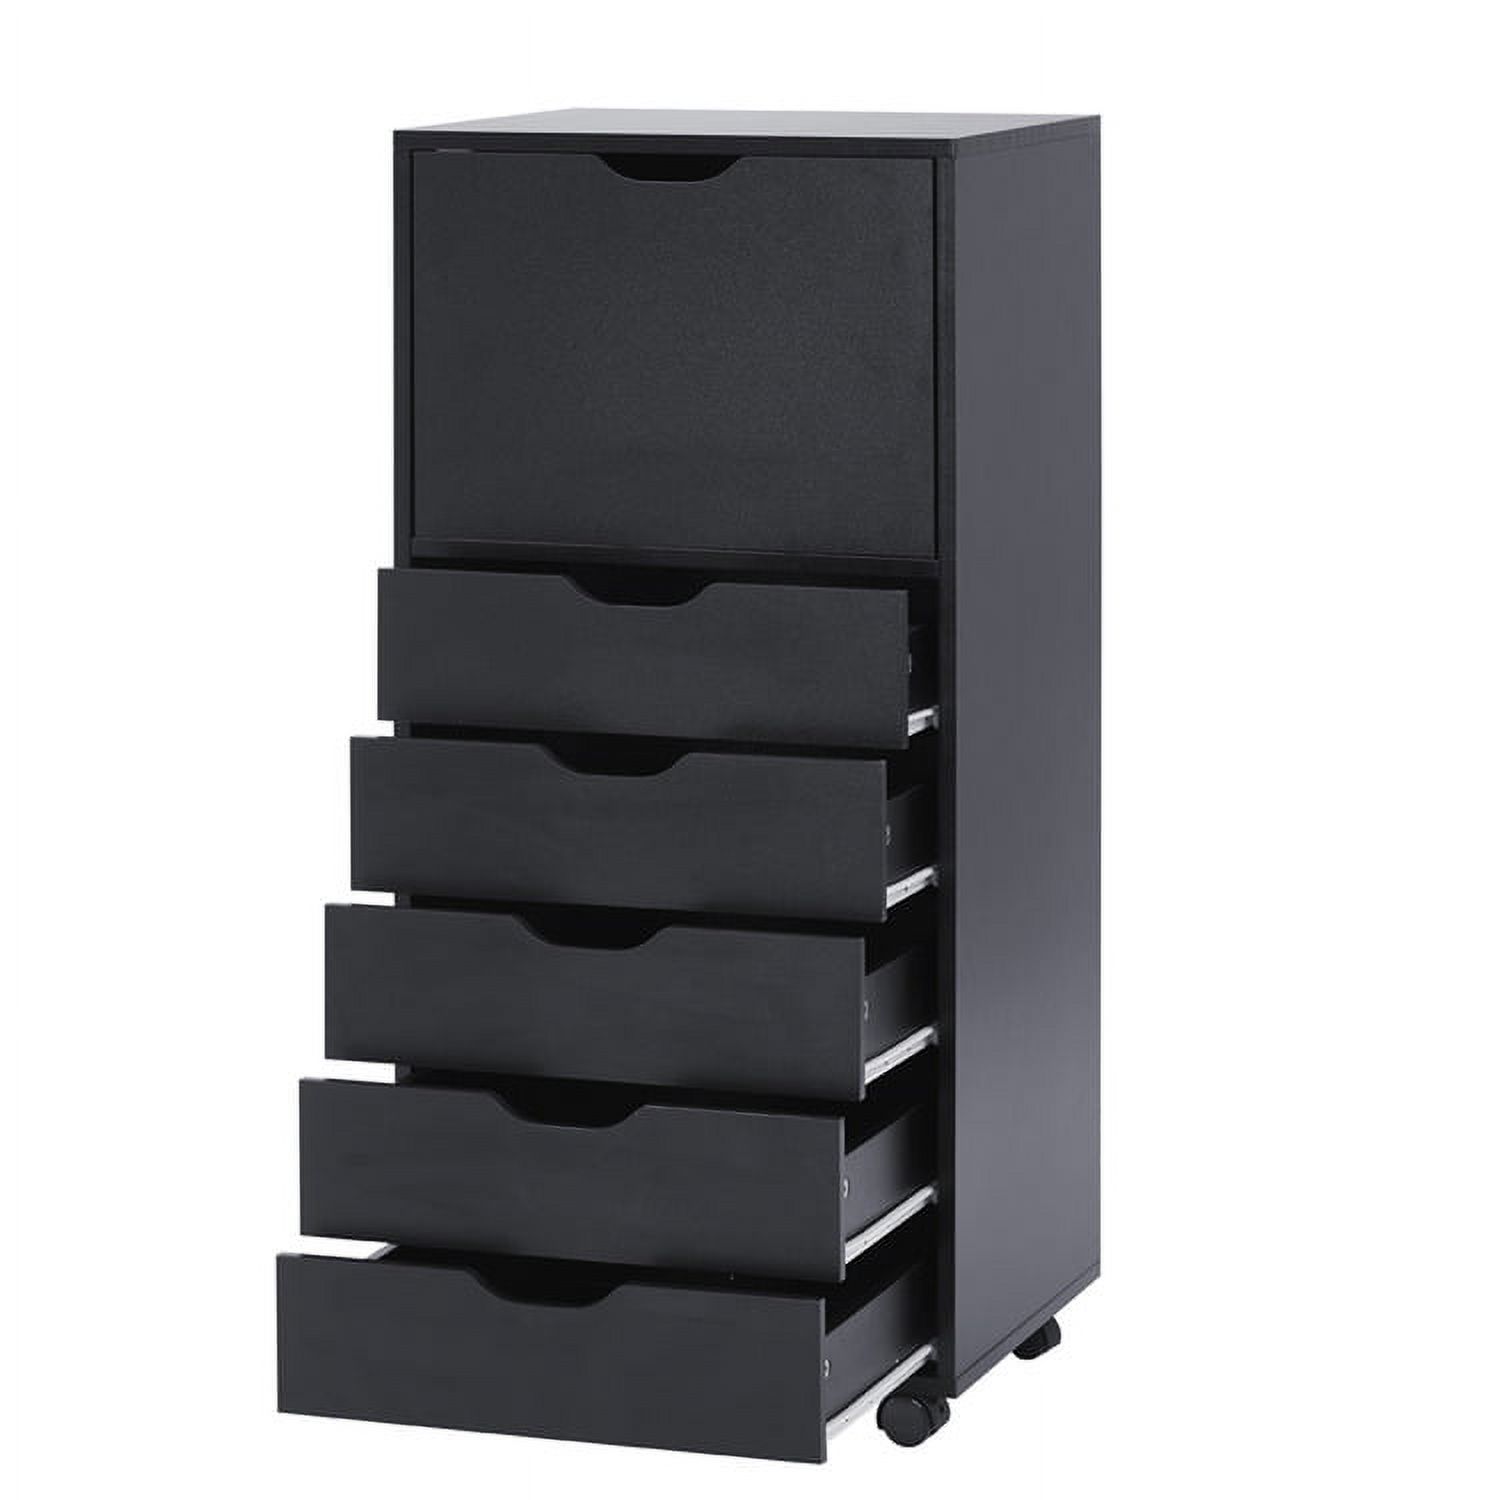 Office File Cabinets Wooden File Cabinets for Home Office Lateral File Cabinet Wood File Cabinet Mobile File Cabinet Mobile Storage Cabinet Filing Storage Drawer Cabinet by Naomi Home Black / 6 Drawer - image 3 of 5